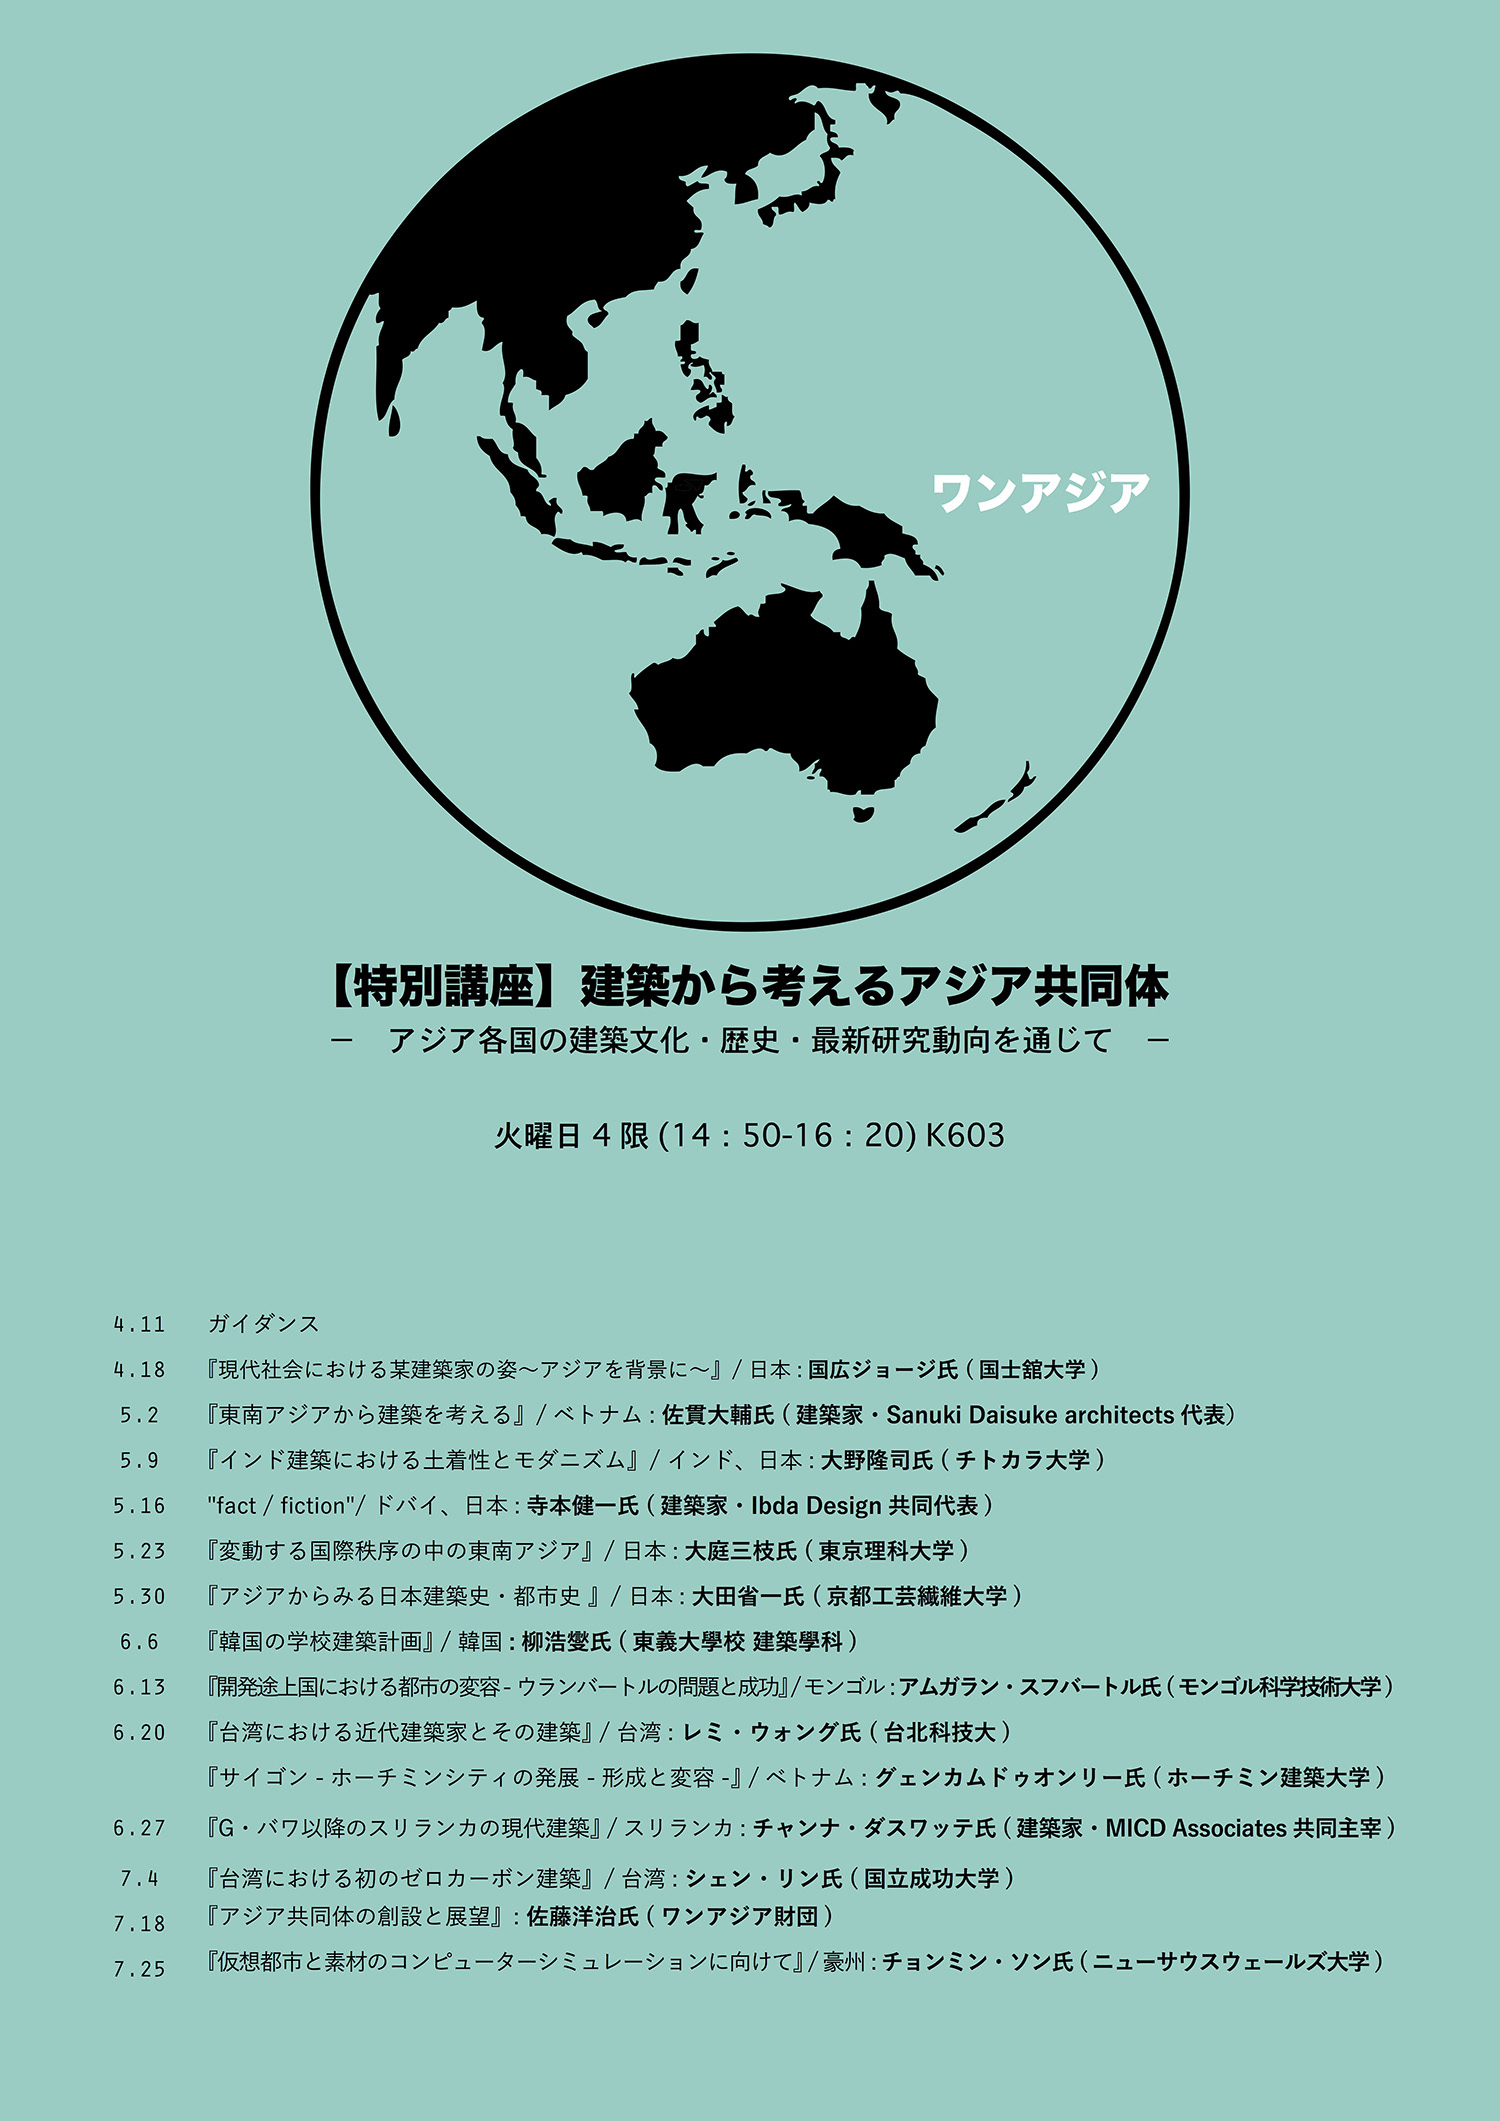 OneAsia Lecture Series